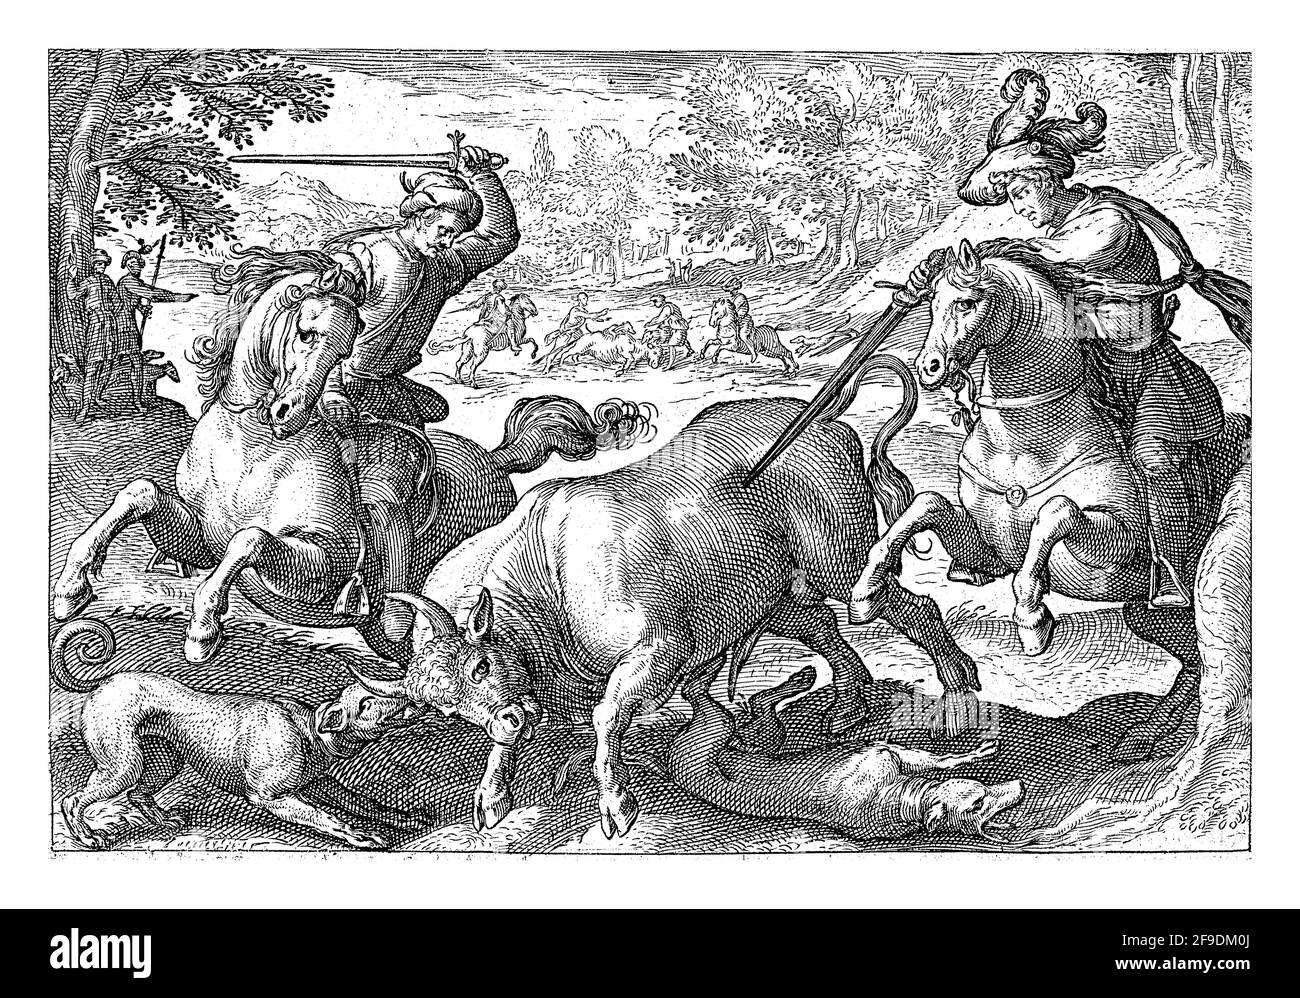 Landscape with in the foreground two horsemen with spears and two dogs chasing a bull. In the background several hunters and riders are hunting a bull Stock Photo